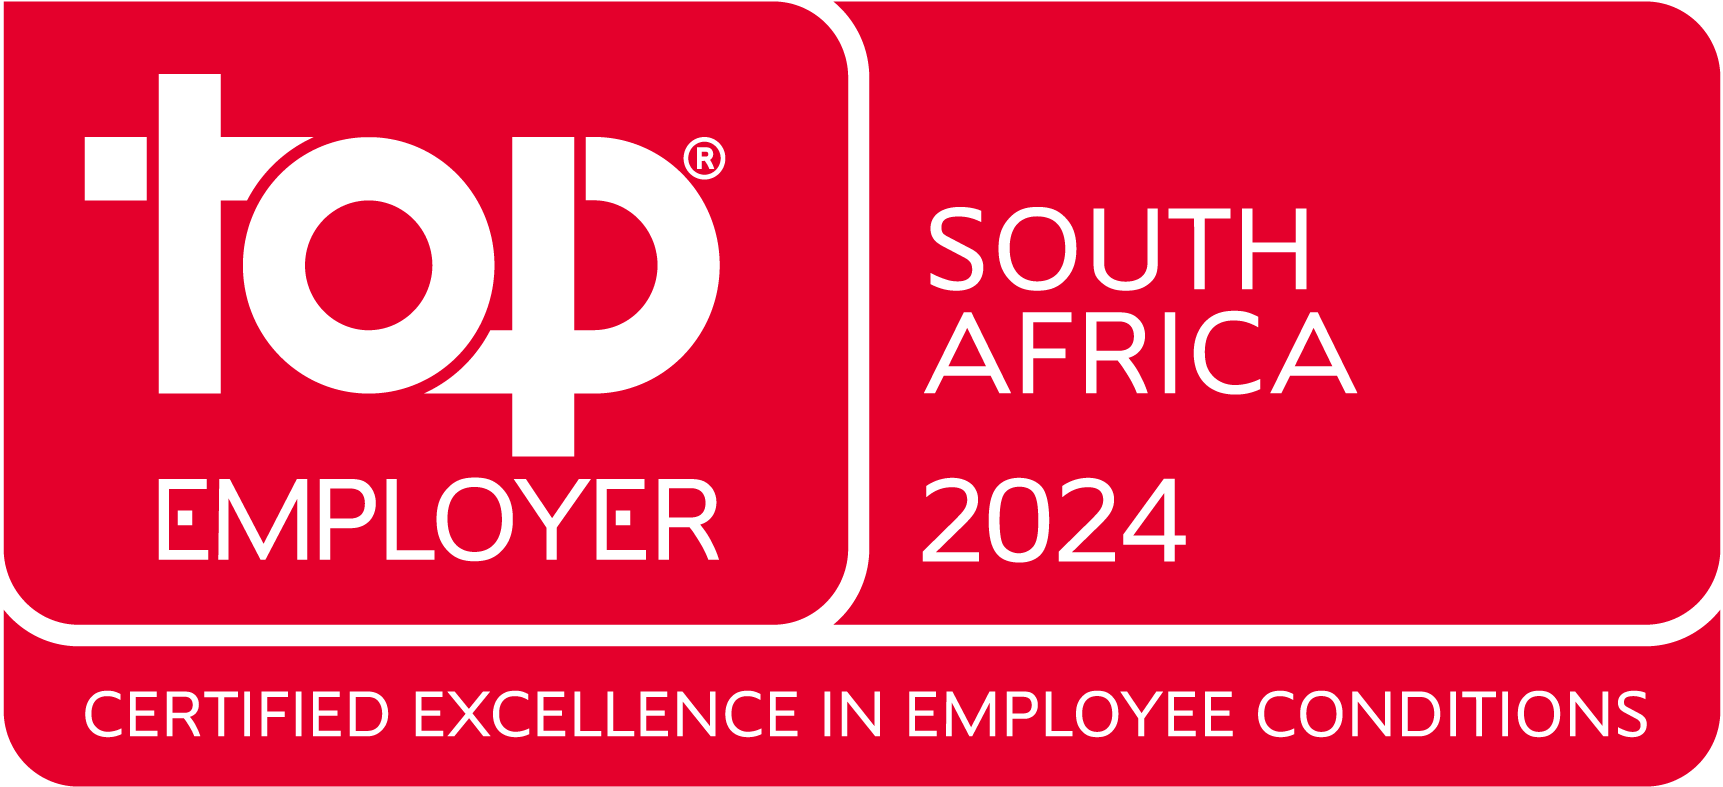 Top Employer South Africa 2024 |